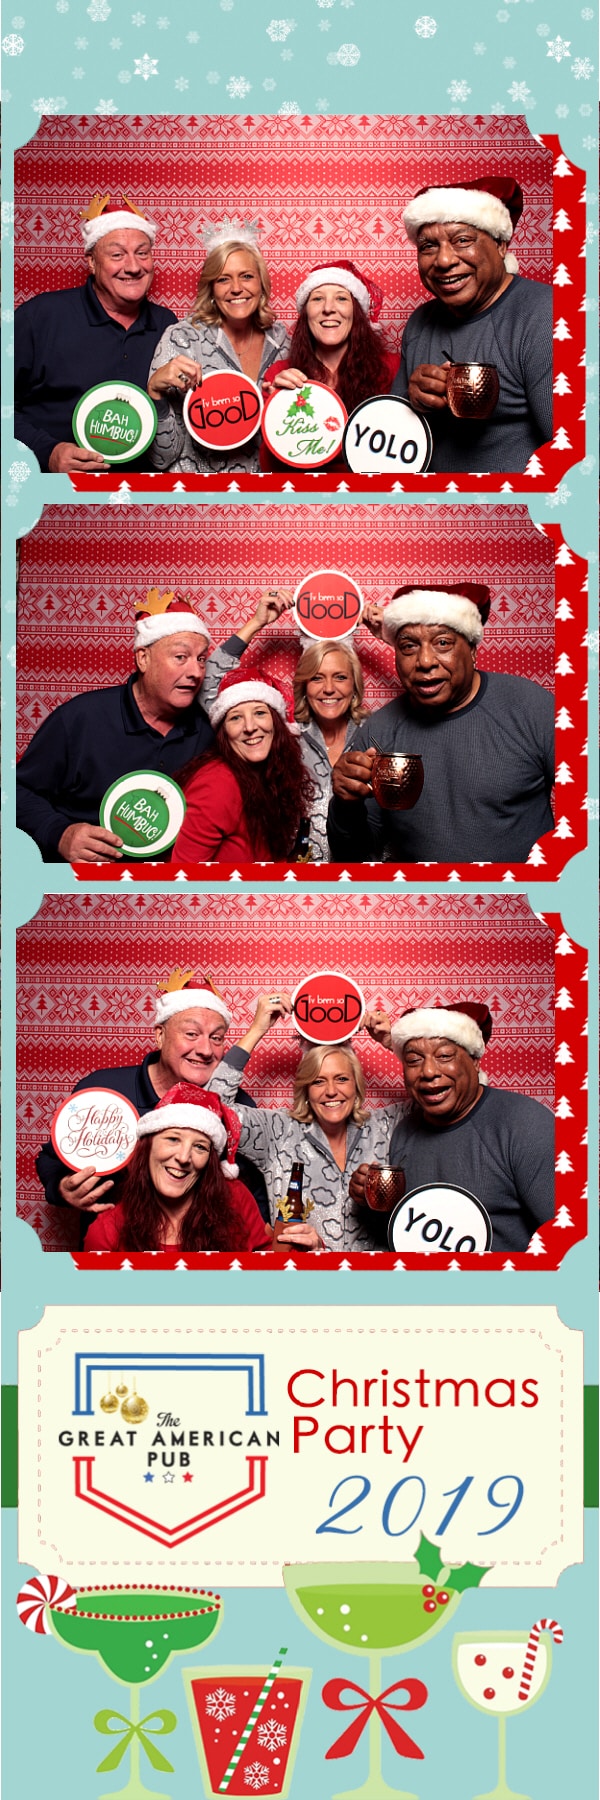 2x6 photo template of group posing with ugly sweater backdrop with Christmas props